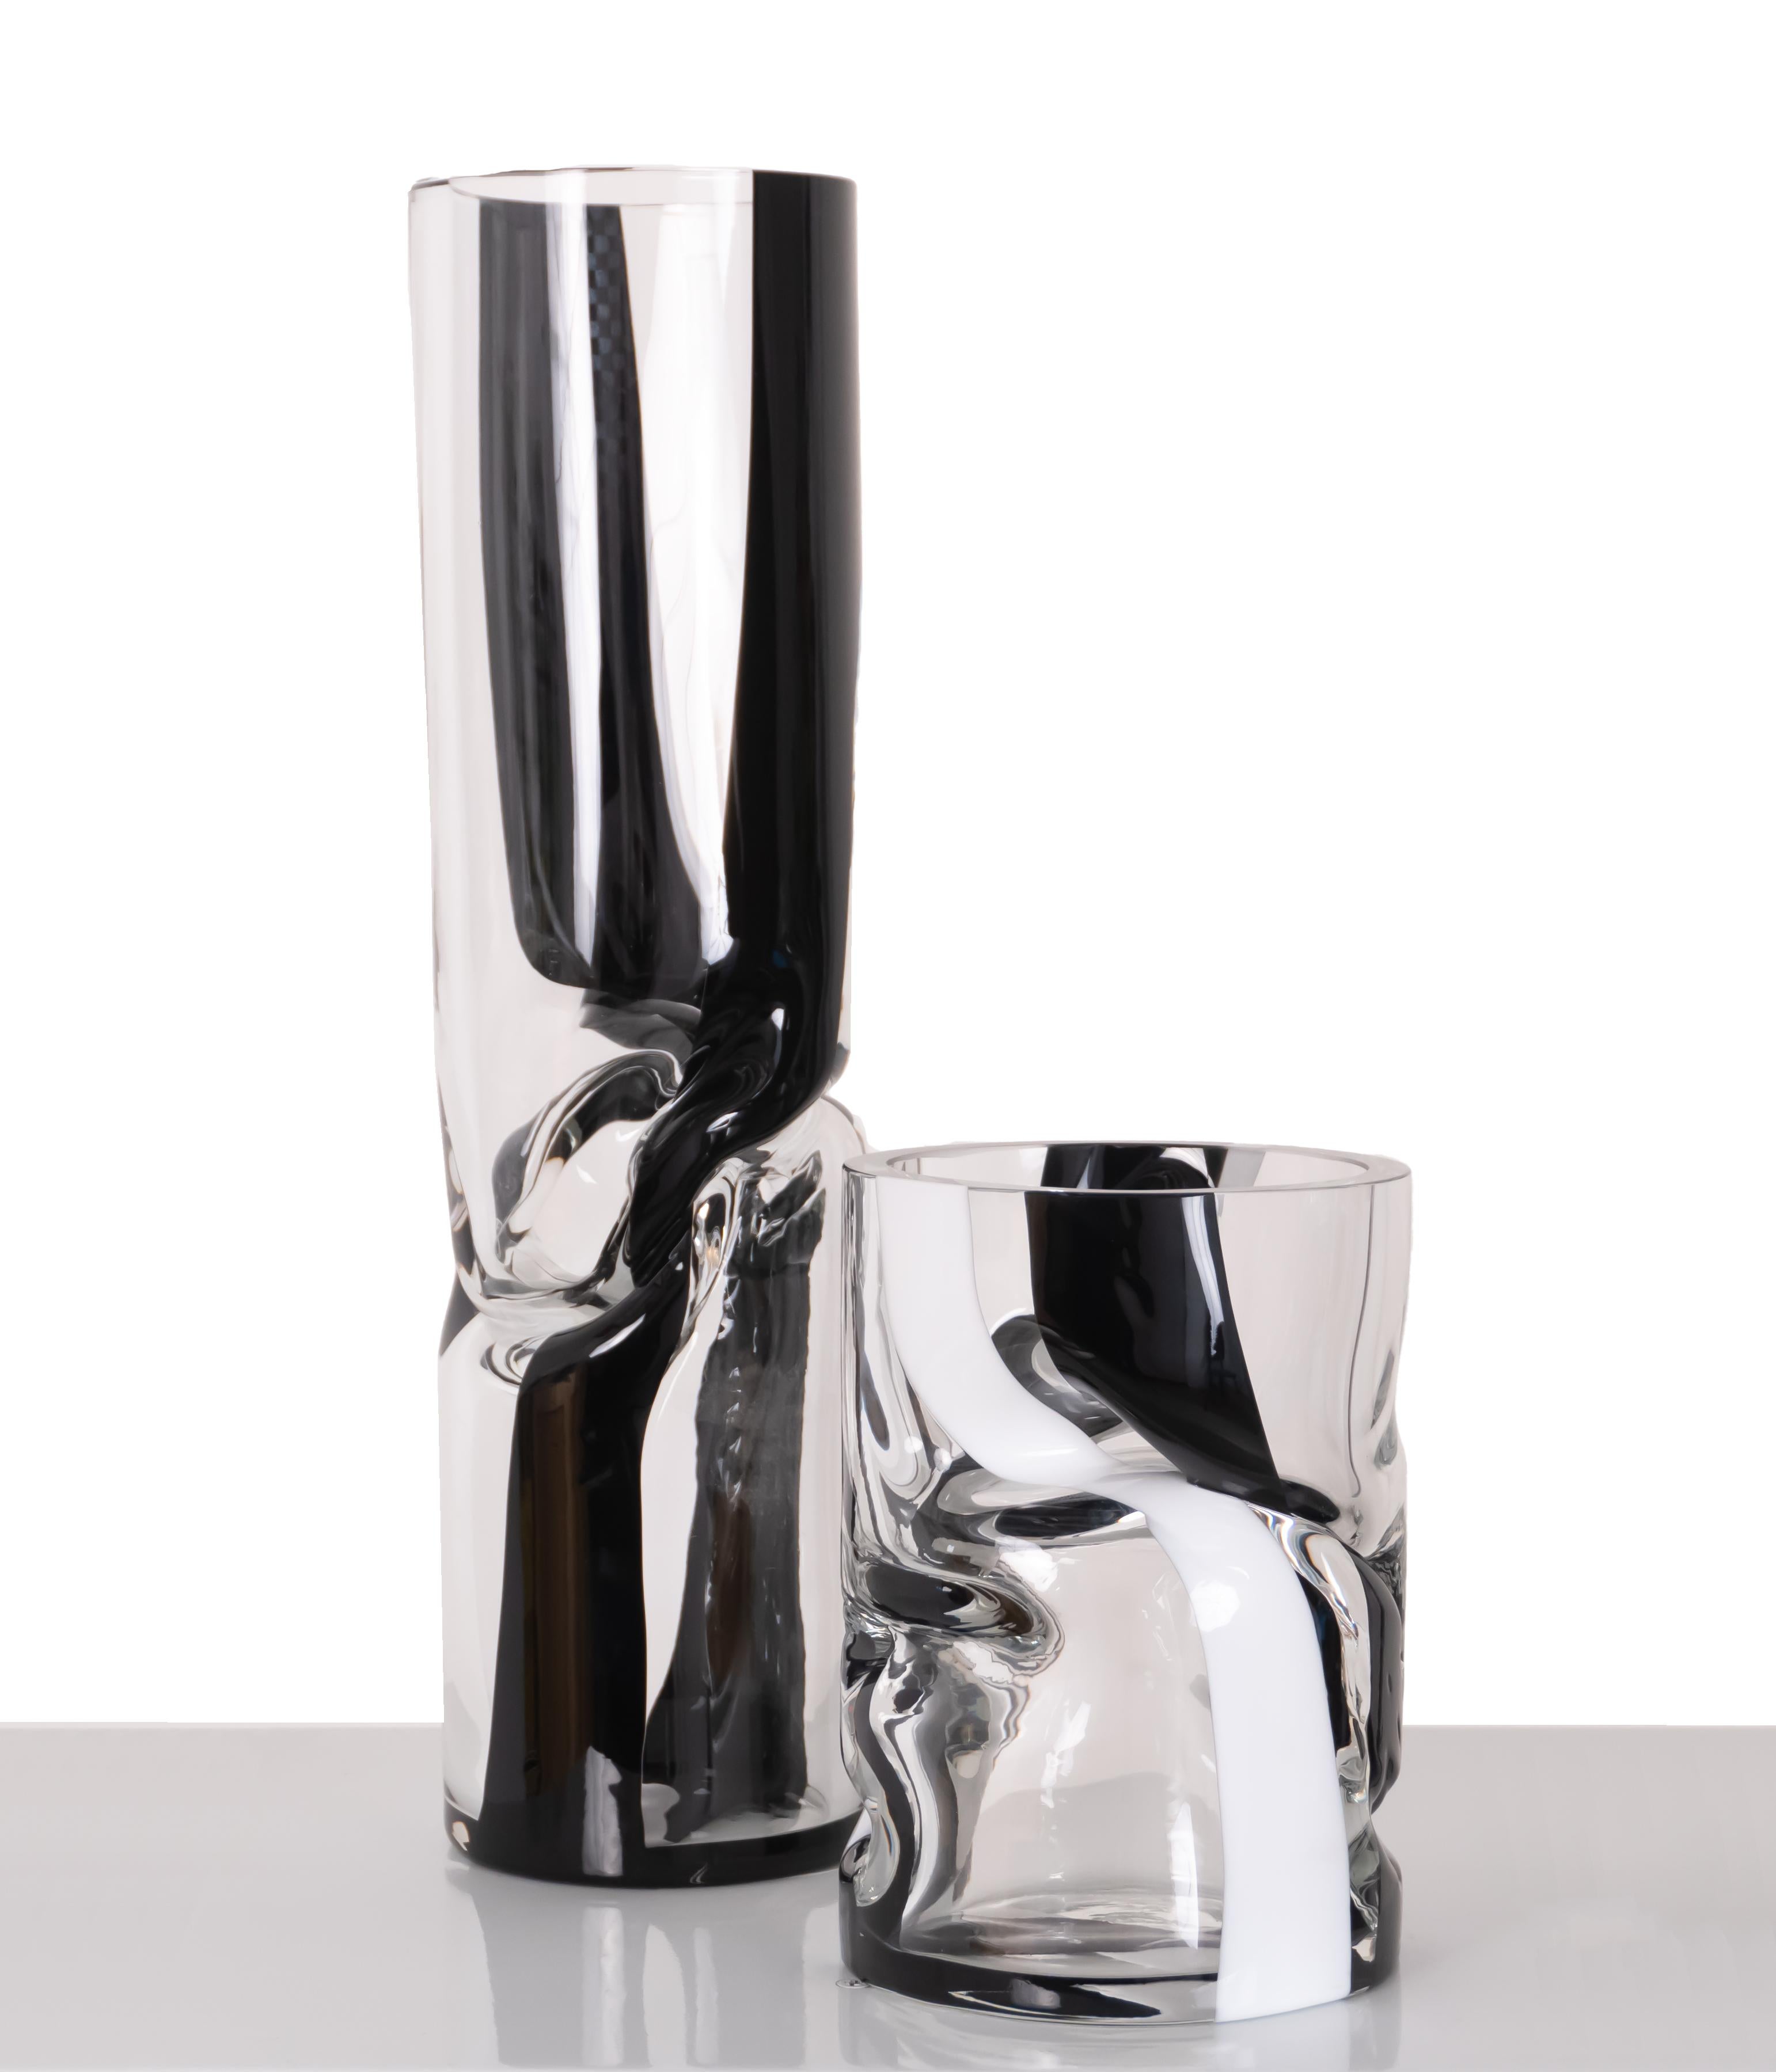 Combining black & white our small striped crushed vase uses contrast to maximum effect. This timeless mix and works beautifully with bold or soft tones.

During the glass blowing process, vases are twisted and shaped to create crushed forms within